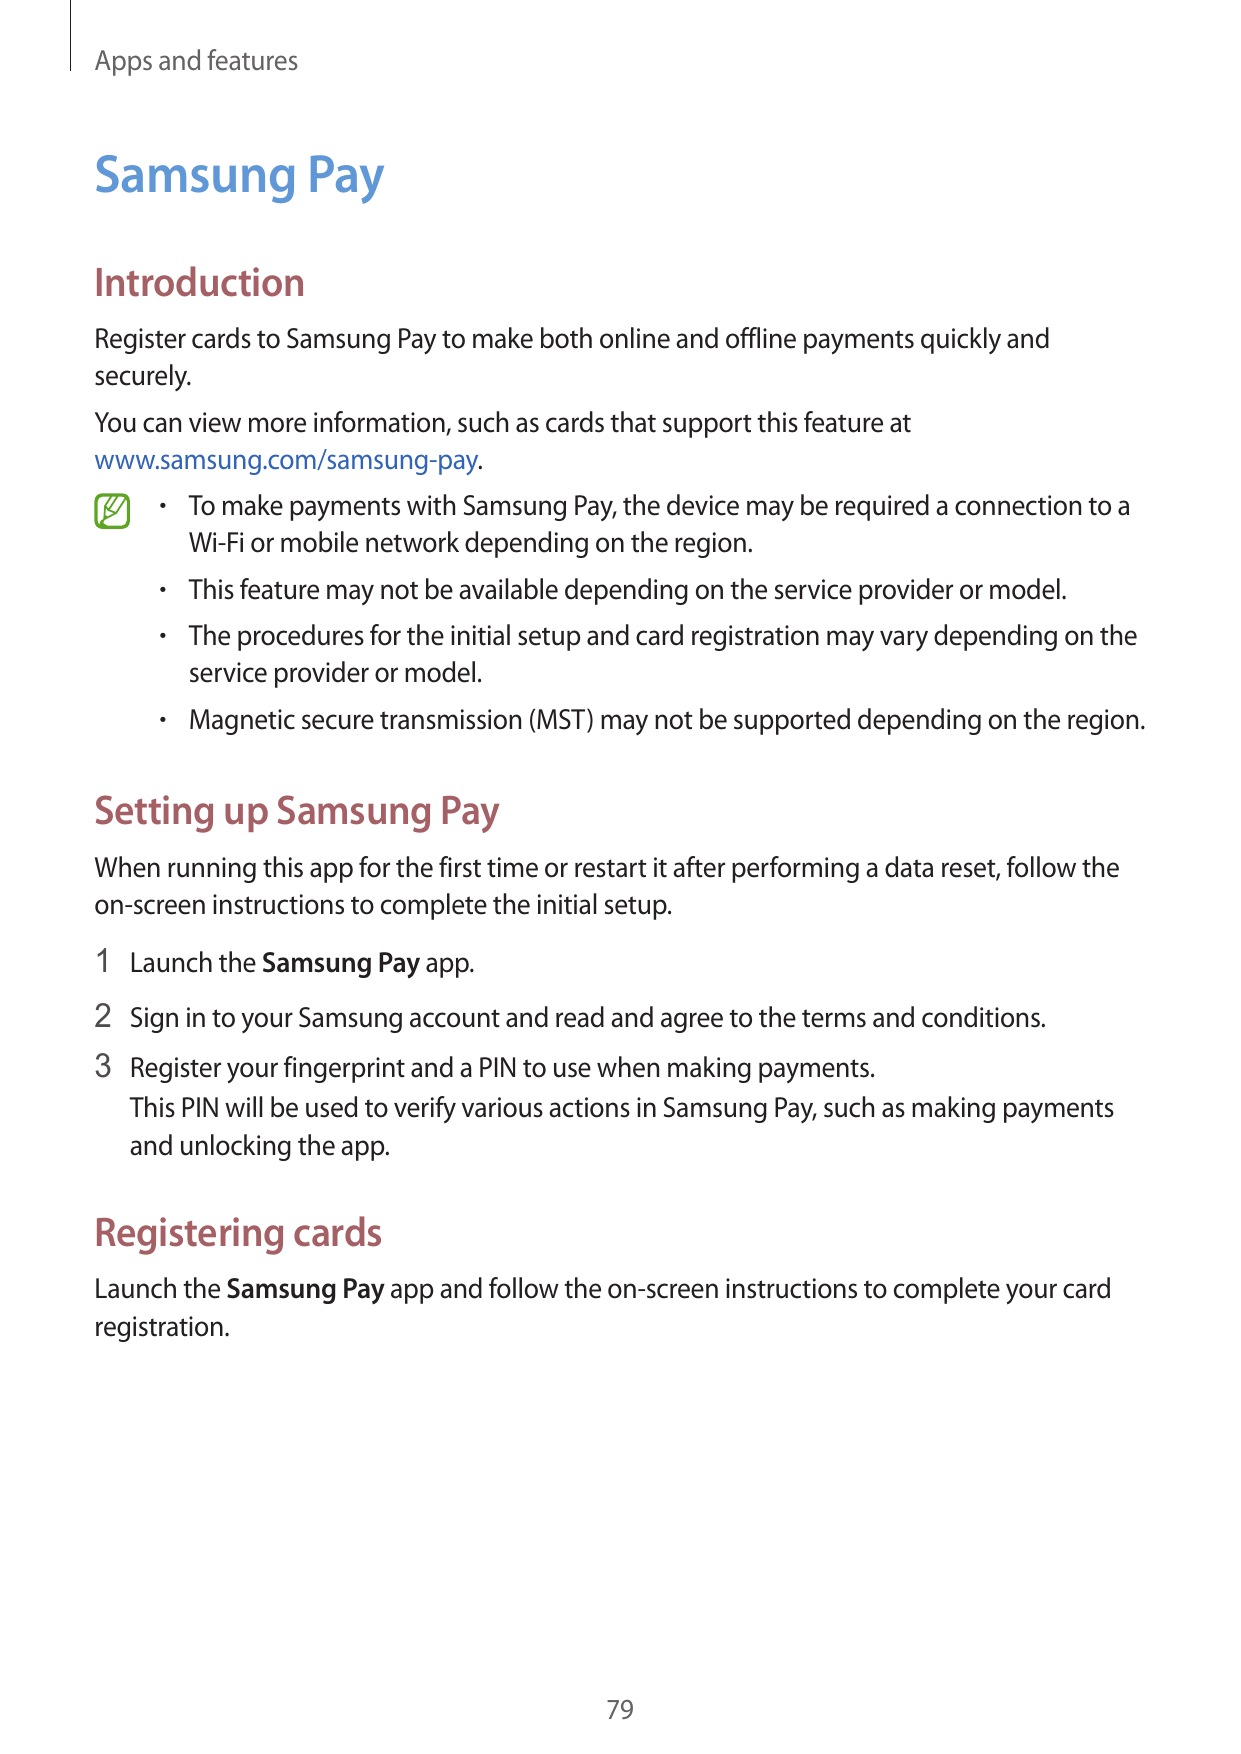 Apps and featuresSamsung PayIntroductionRegister cards to Samsung Pay to make both online and offline payments quickly andsecure